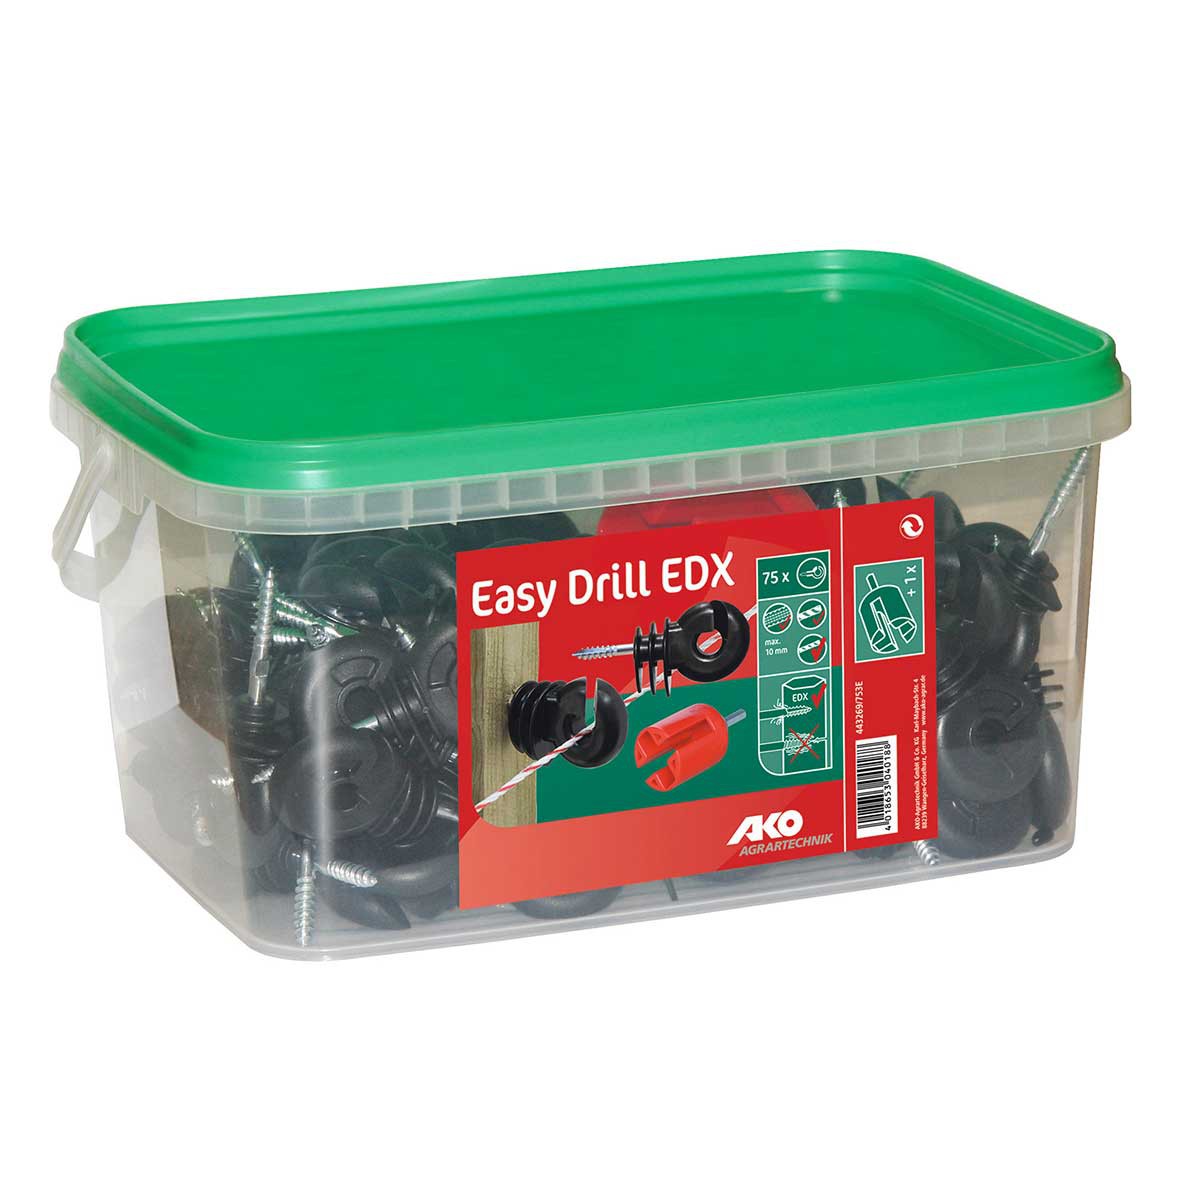 Ring insulator EDX EasyDrill contin. support black 75 pcs